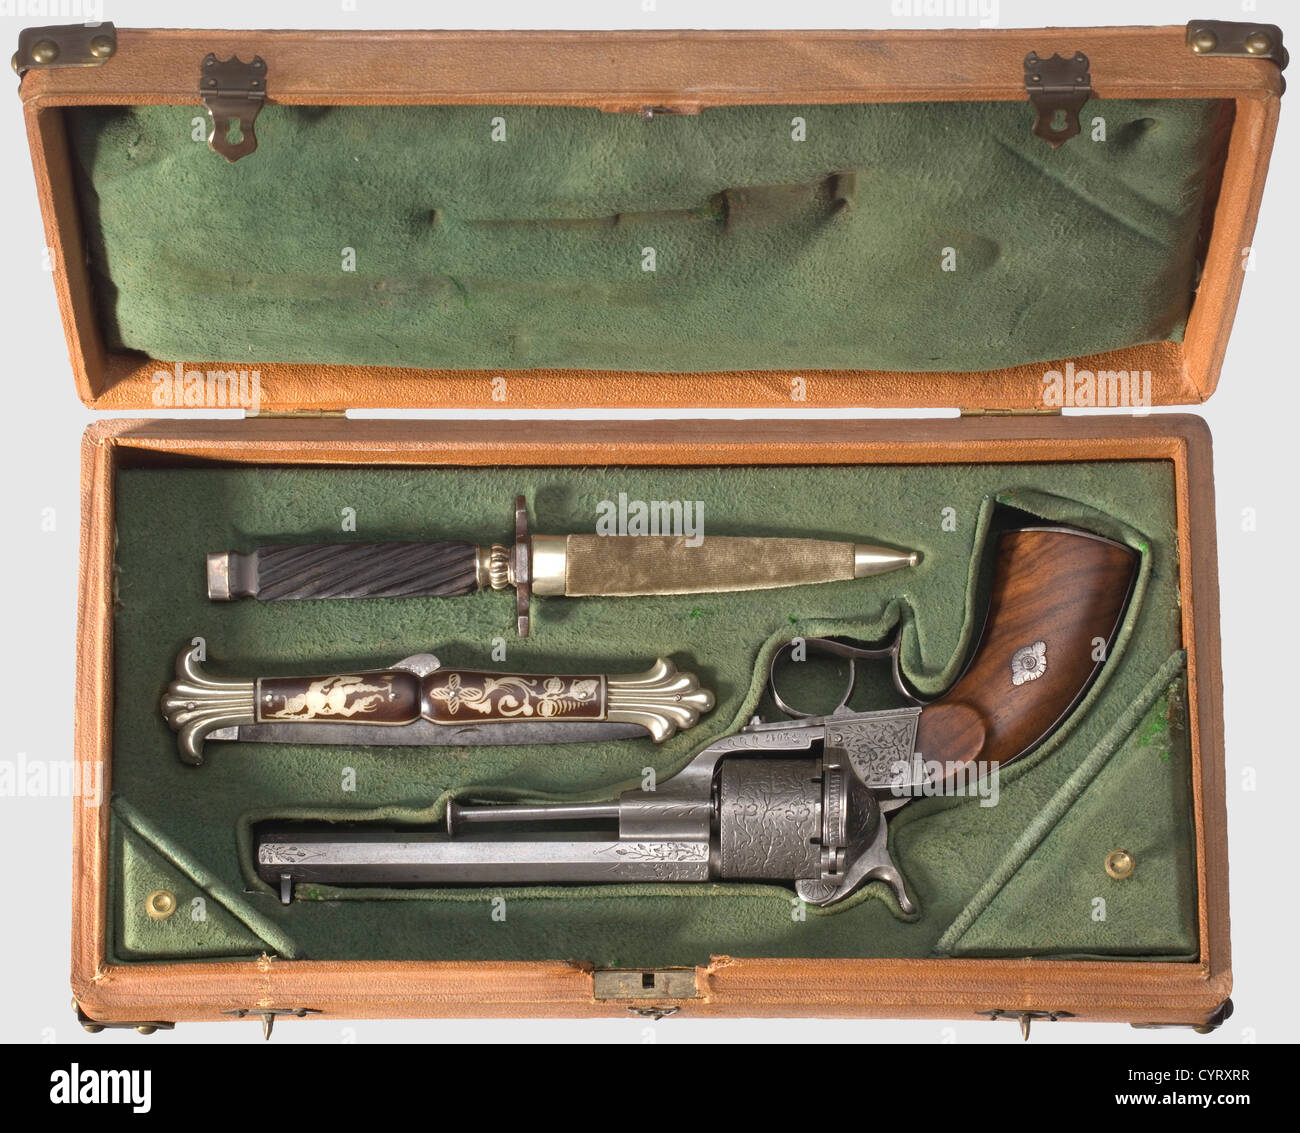 A pin-fire revolver in its case,Eugene Lefaucheux in Paris,circa 1860. Calibre 9 mm Lefaucheux,no. 2017. Octagonal 6' barrel with dovetailed front sight,6-shot cylinder. Barrel root,frame and cylinder with engraved vine leaf decoration. Smooth walnut grip panels,engraved pommel cap. Length 29.5 cm. Comes with matching leather-covered case,lightly curved lid with brass folding handle. Inside lined with green felt,additional jack-knife and dagger with sheath. Matching dagger,however not likely to be an original accessory. Knife length 33.5 cm,dagger len,Additional-Rights-Clearences-Not Available Stock Photo